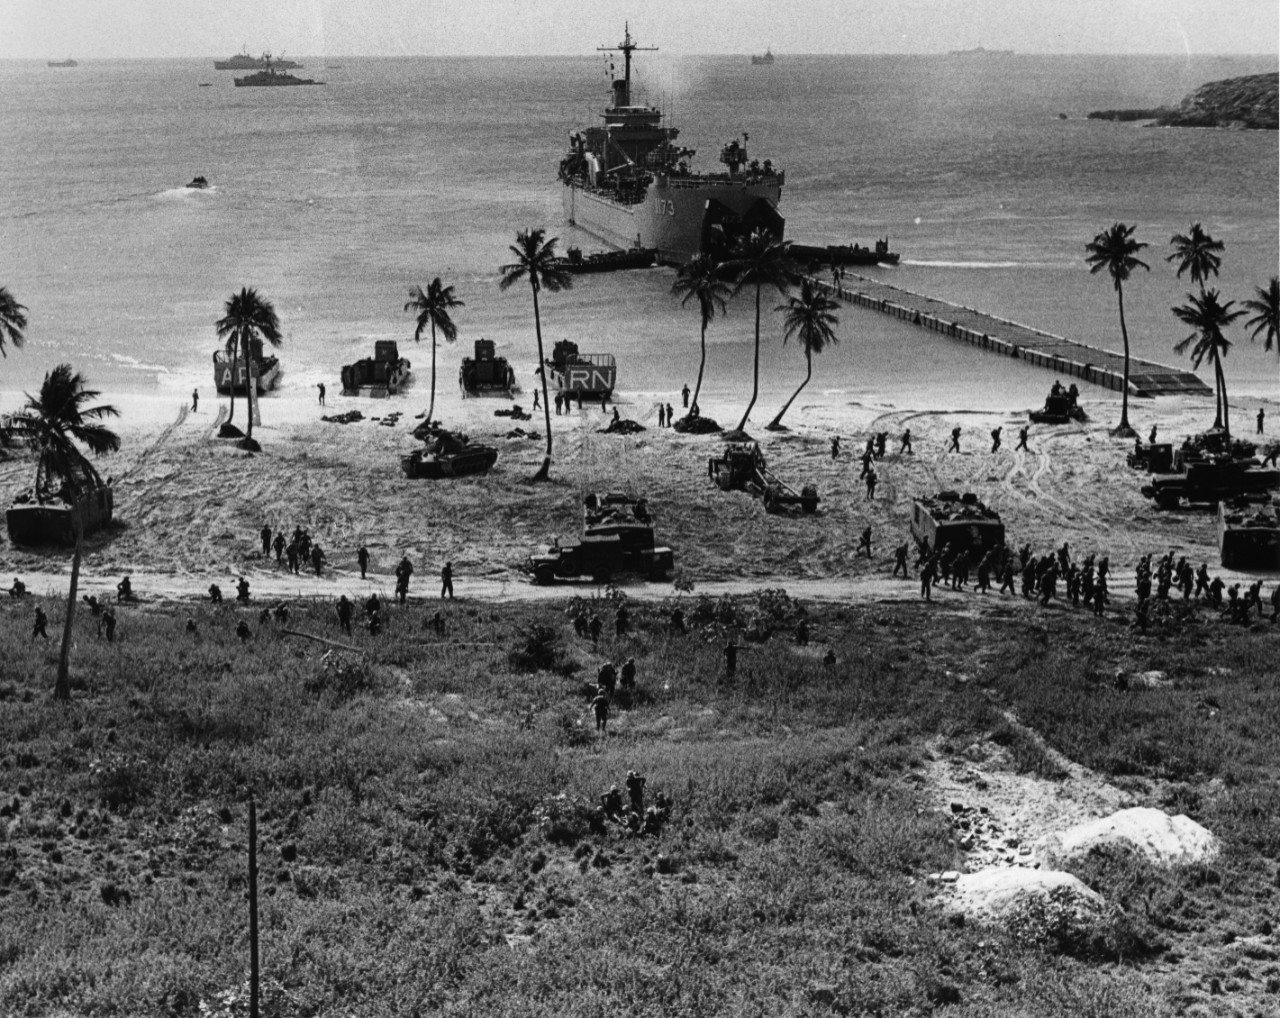 Tank landing ship USS Suffolk County (LST-1173), with the Second Fleet in the Caribbean, offloads tanks and vehicles, while US Marines storm ashore on the island of Vieques during LANTFLEX 66, a major Atlantic Fleet exercise. Other ships are visible in the background, as well as LCVP on shore.